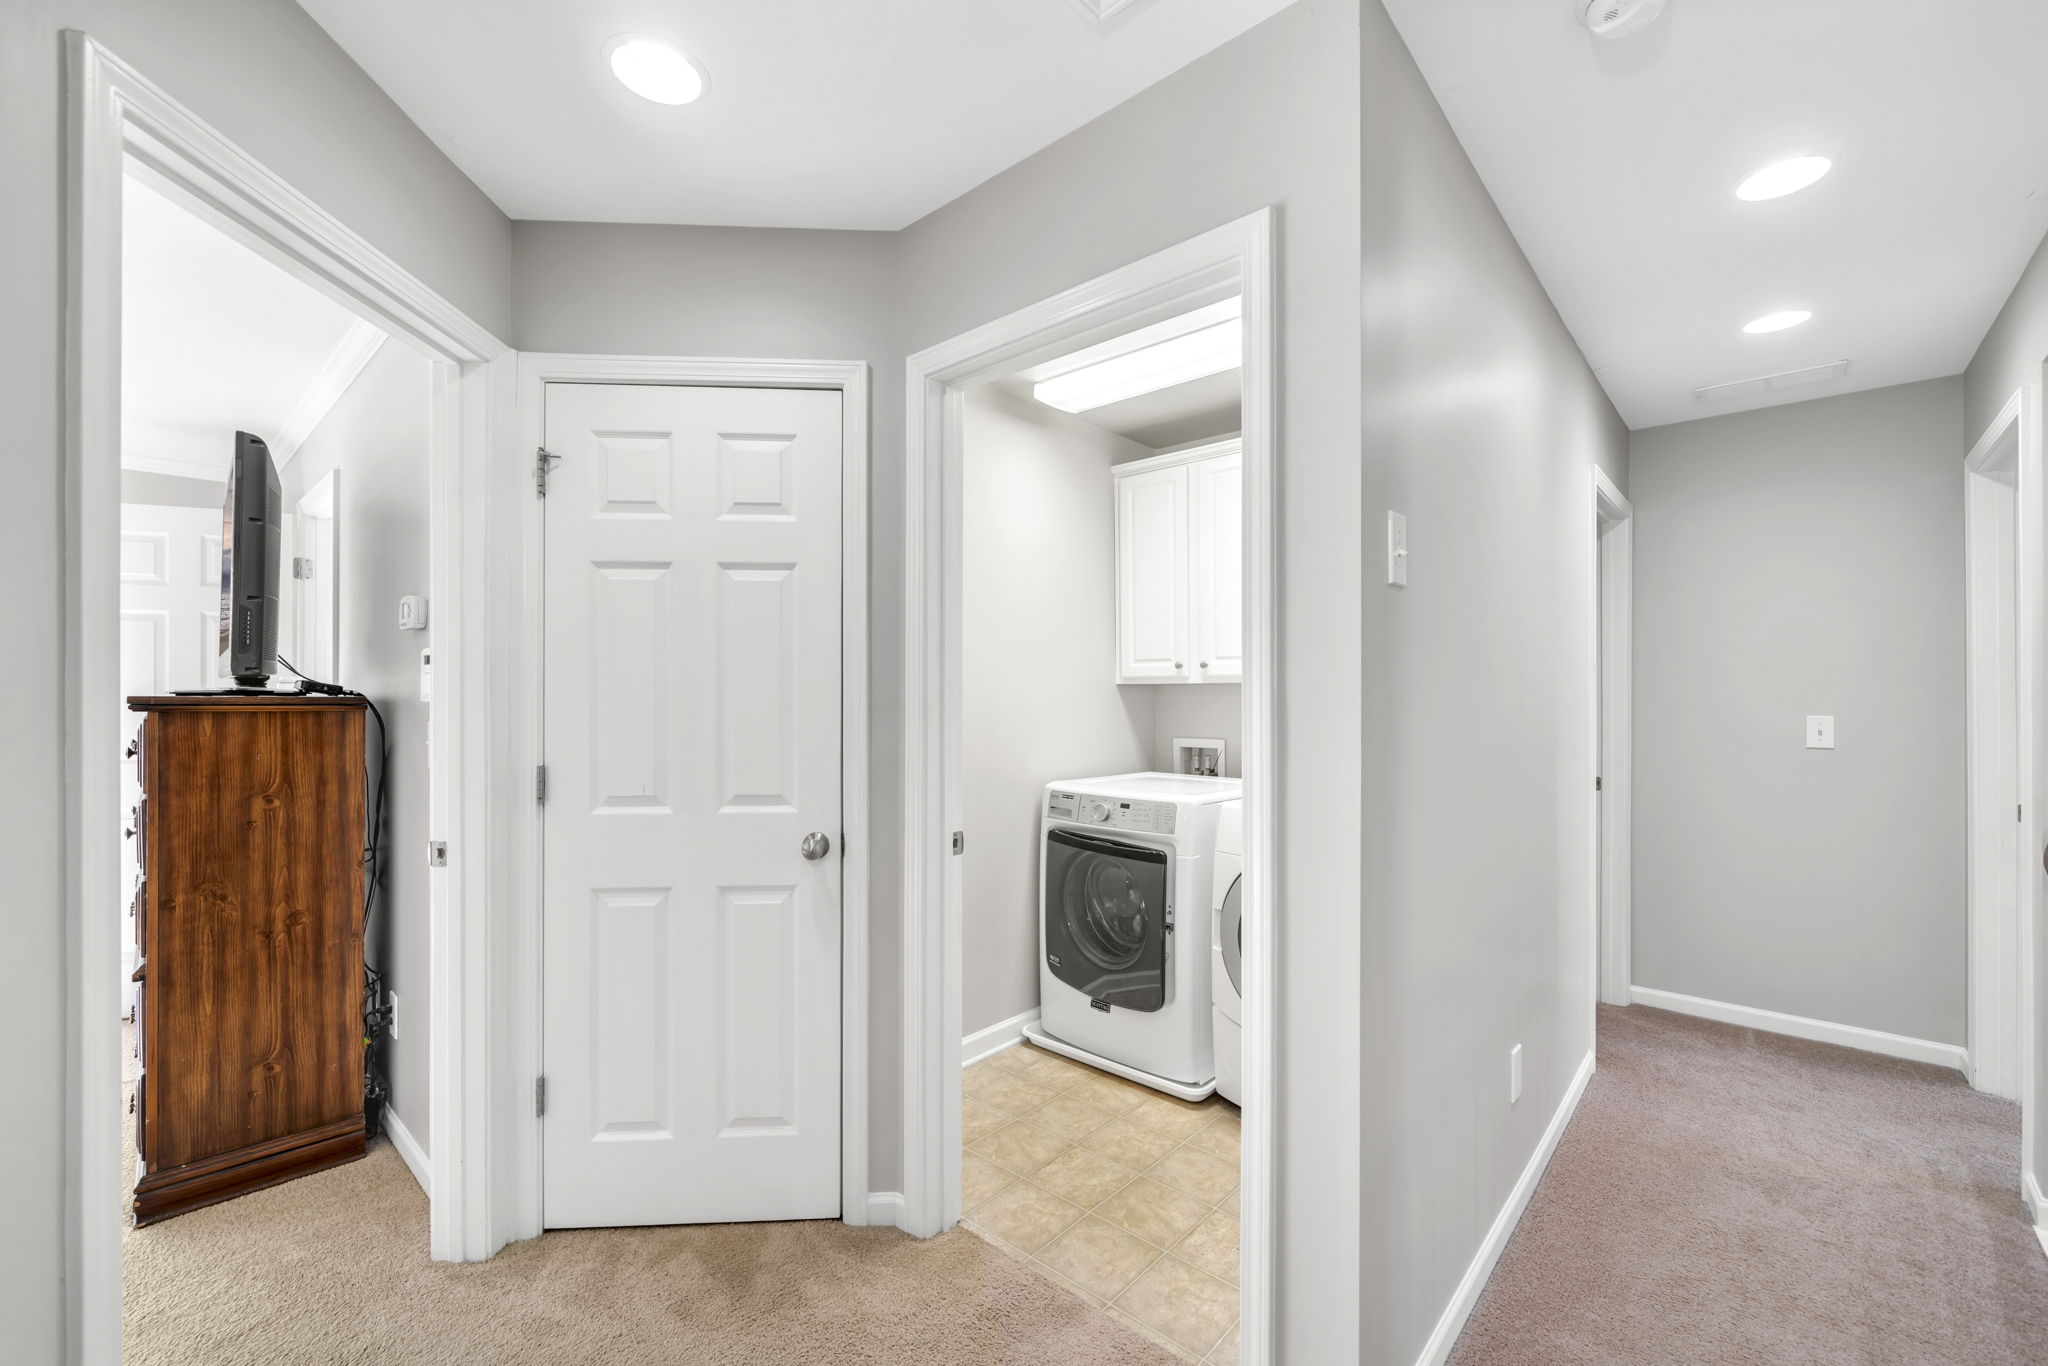 Laundry Room located beside Master Bedroom